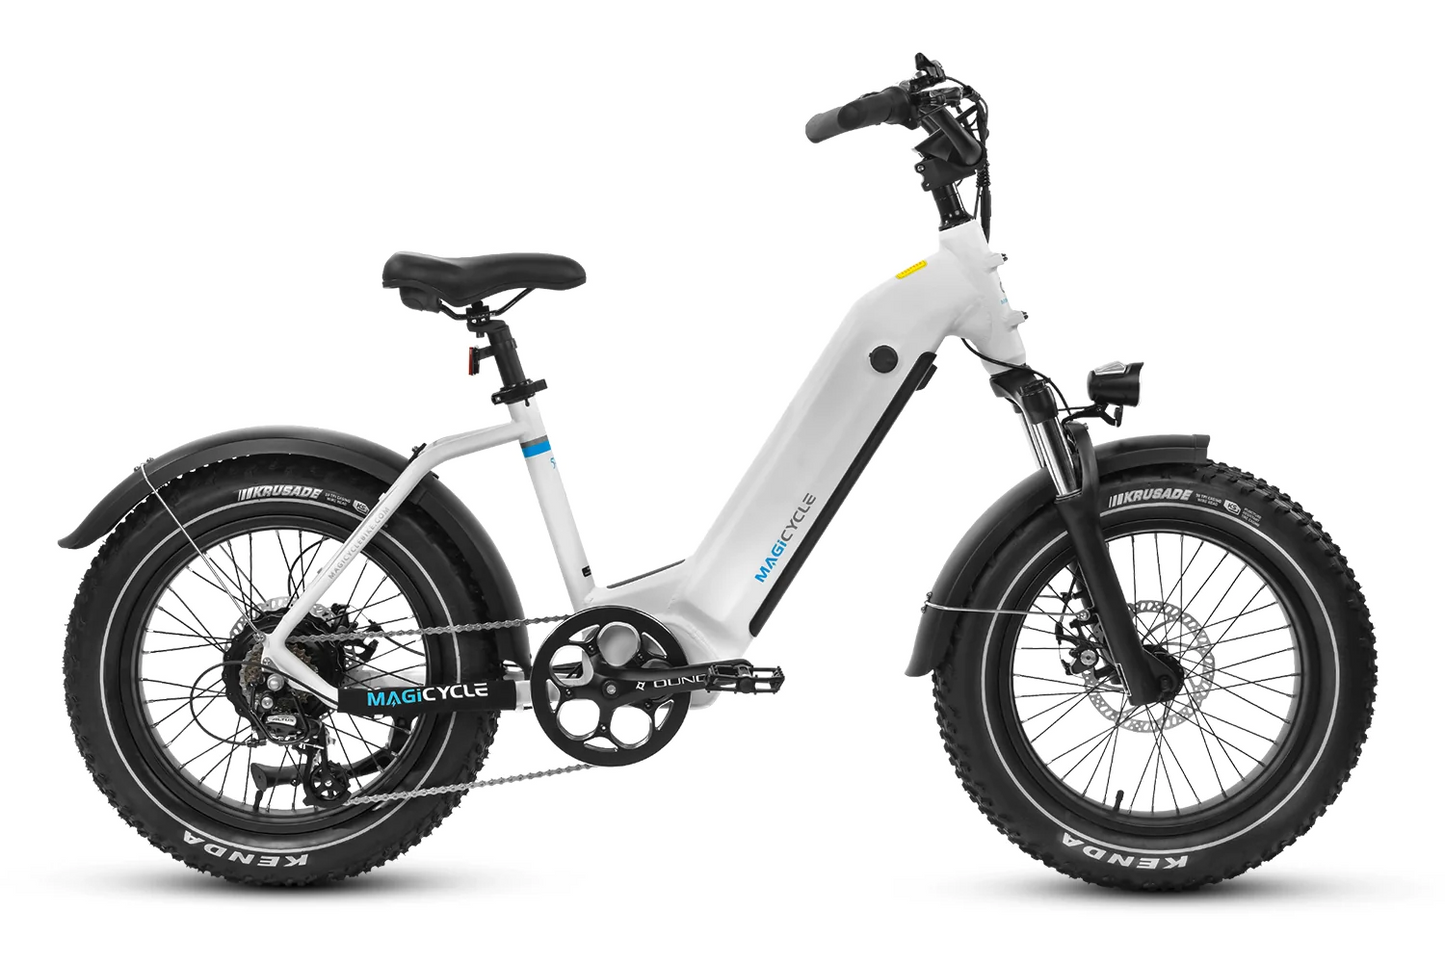 The Magicycle - Ocelot is an electric bike with a white frame and black fenders, featuring knobby tires, a front suspension fork, and a mounted battery on the down tube. Powered by either a 750W or 1000W motor, this bike proudly displays "MAGICYCLE" branding.